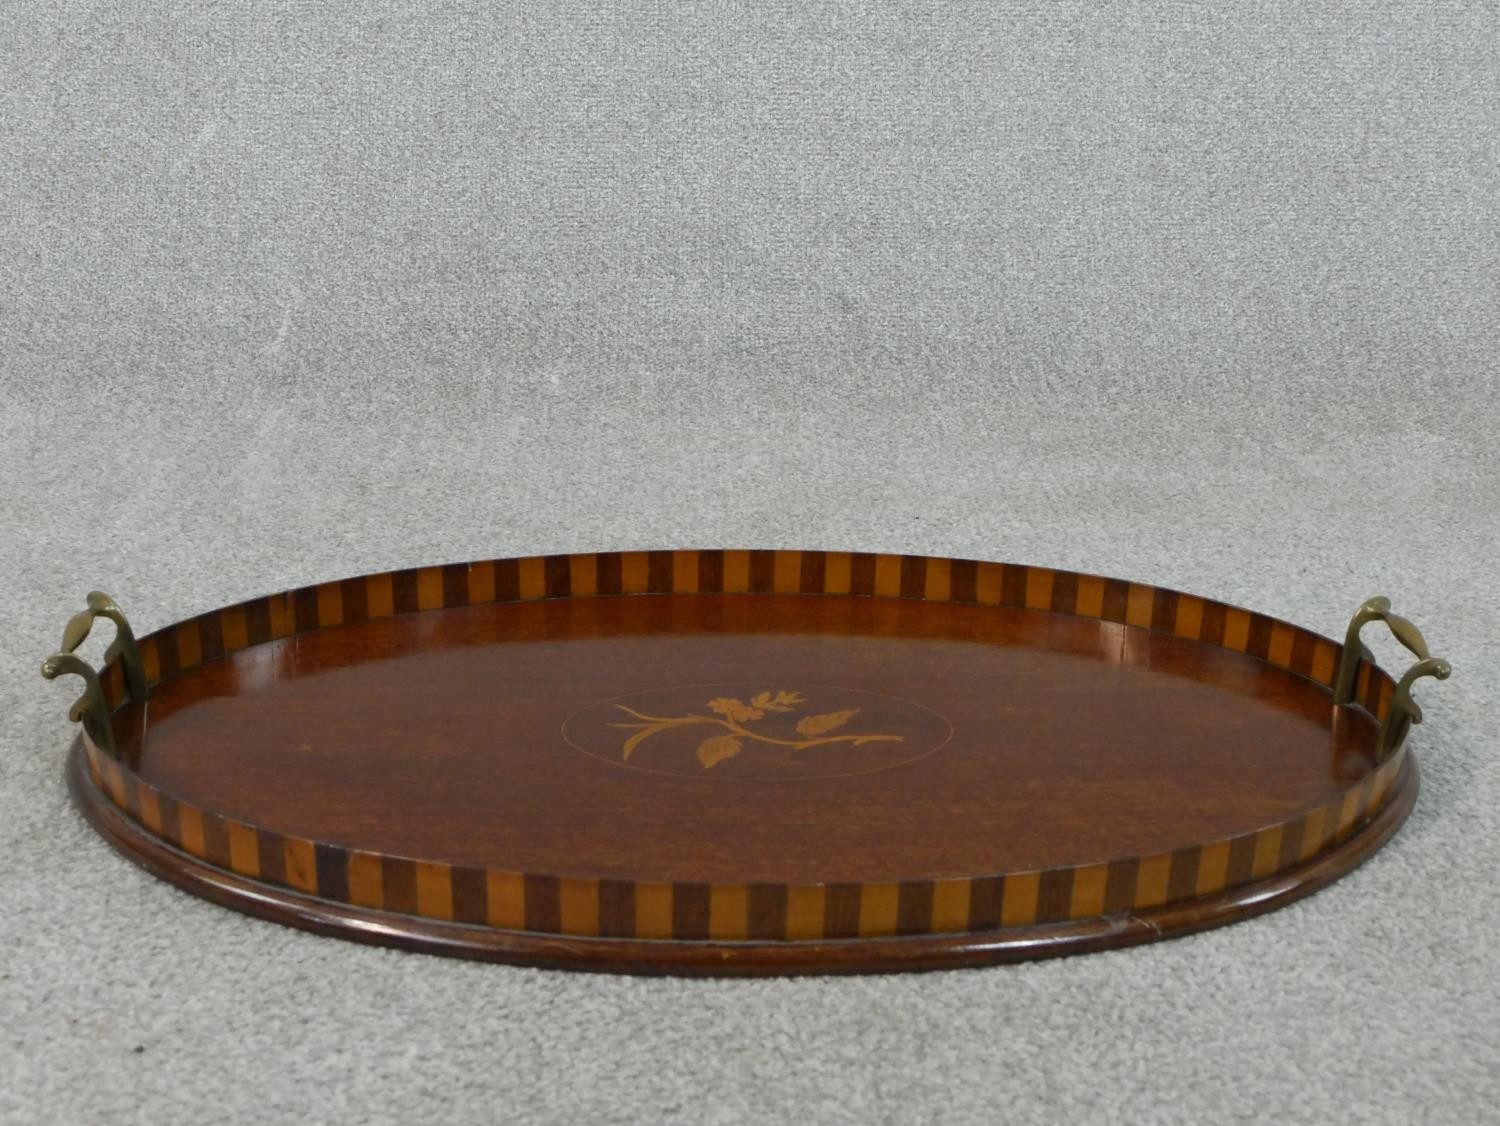 An Edwardian walnut and marquetry inlaid oval tray, with two brass handles, the centre inlaid with a